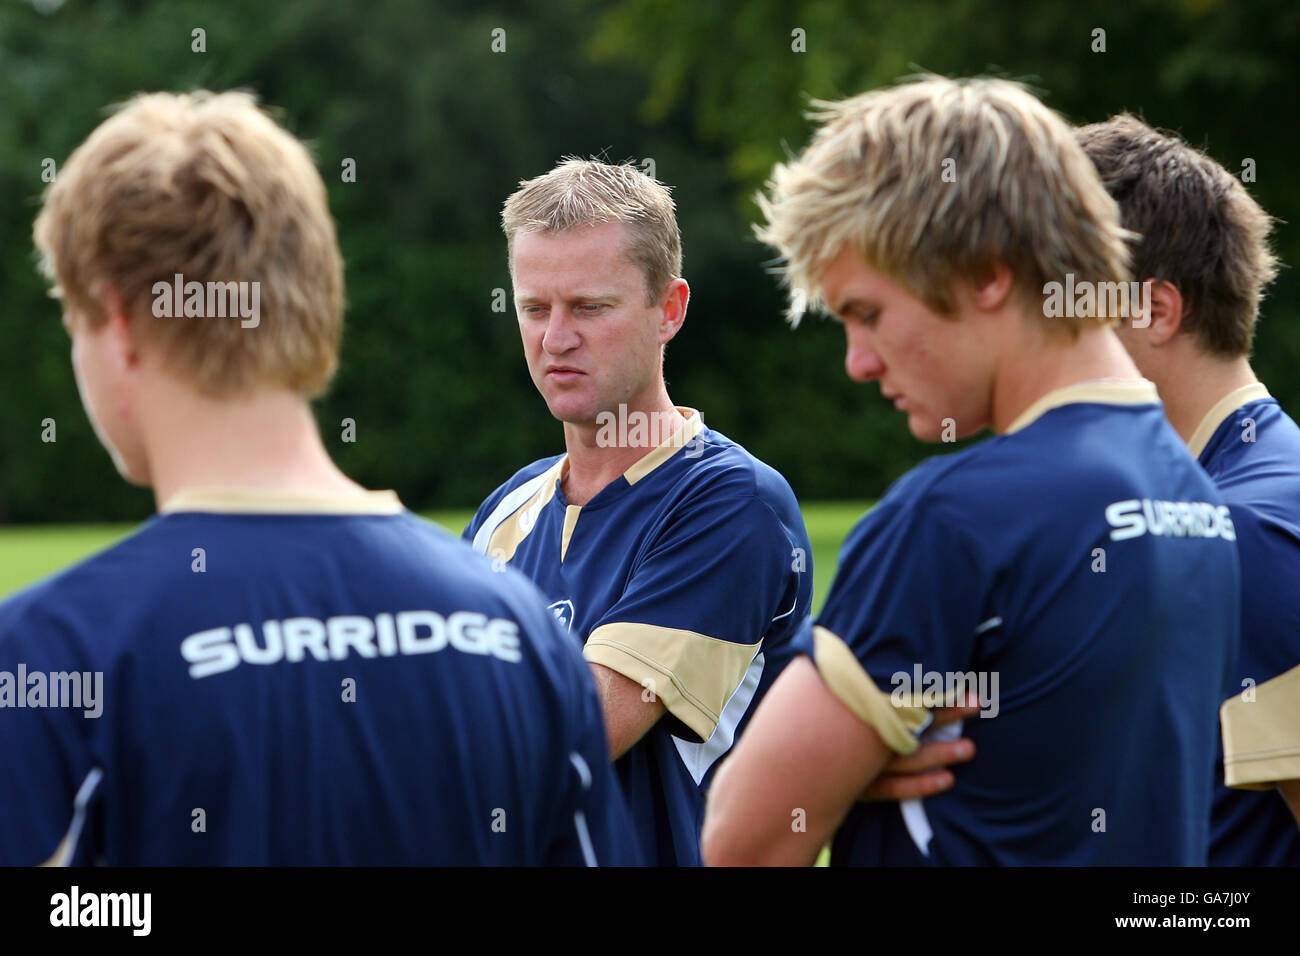 Surrey Academy coach Gareth Townsend talks to his players Stock Photo